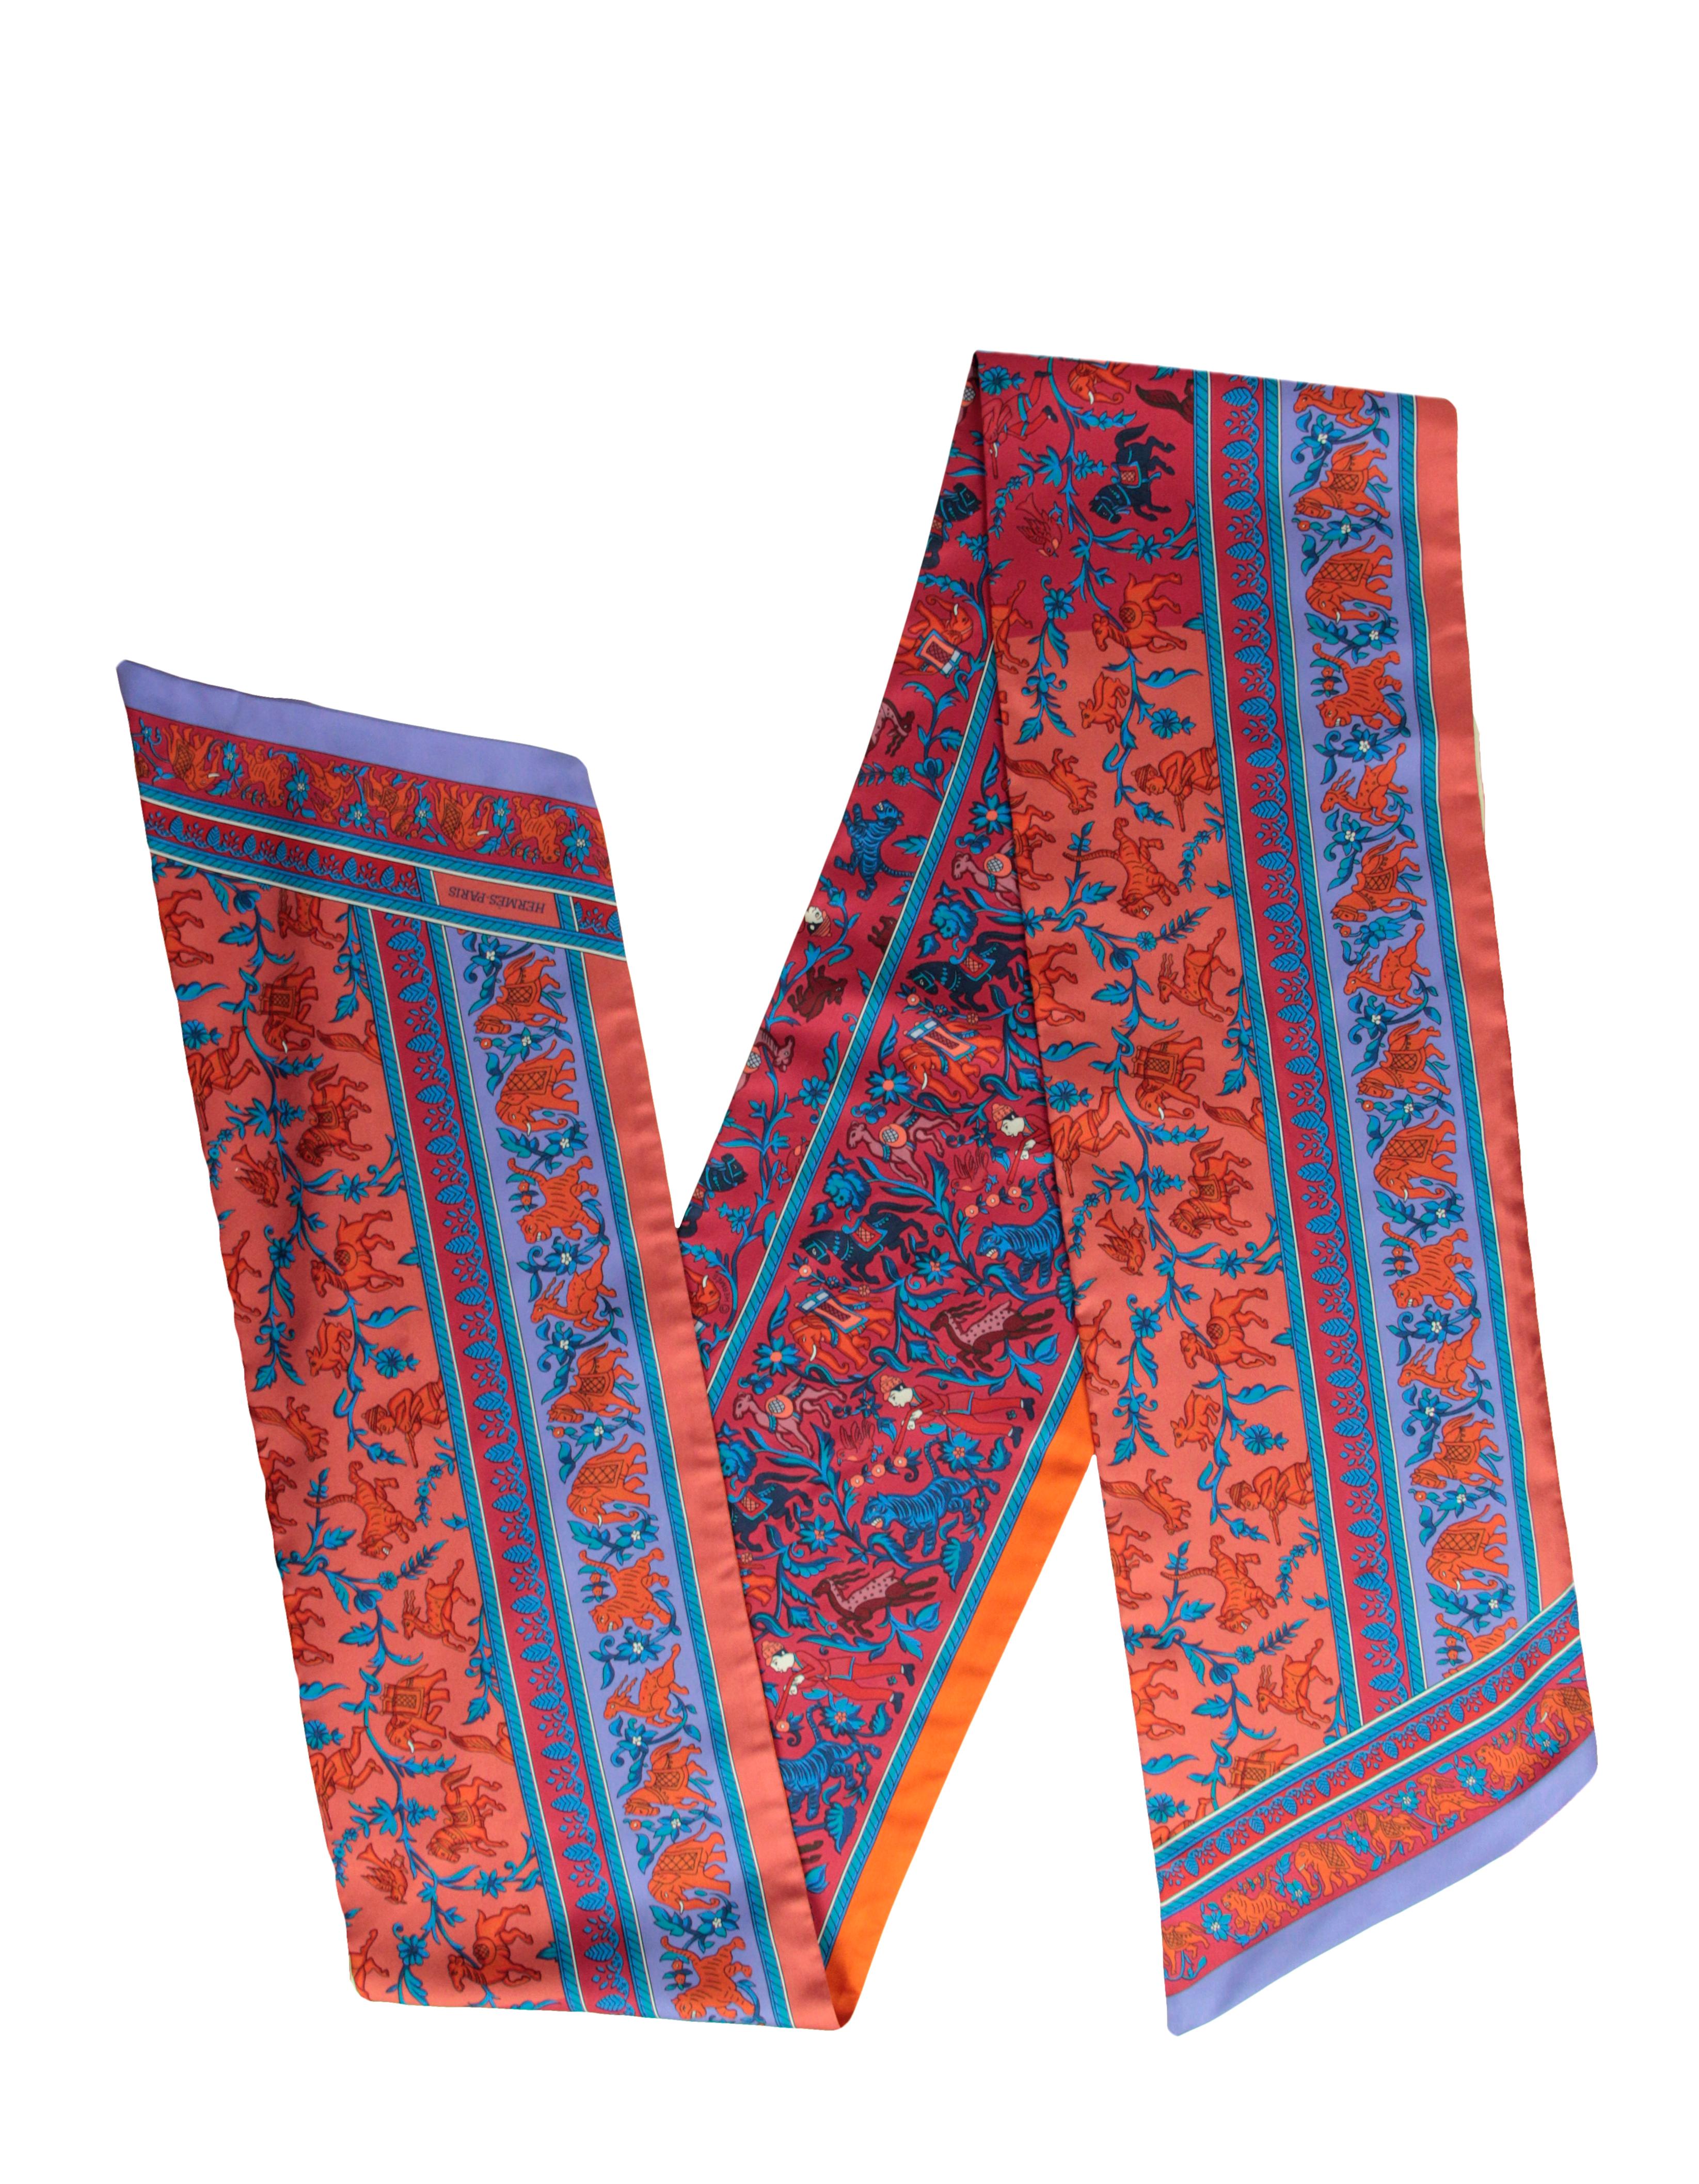 Hermes Red/ Blue Chasse en Inde (Hunt in India) Silk Maxi Twilly Scarf 1